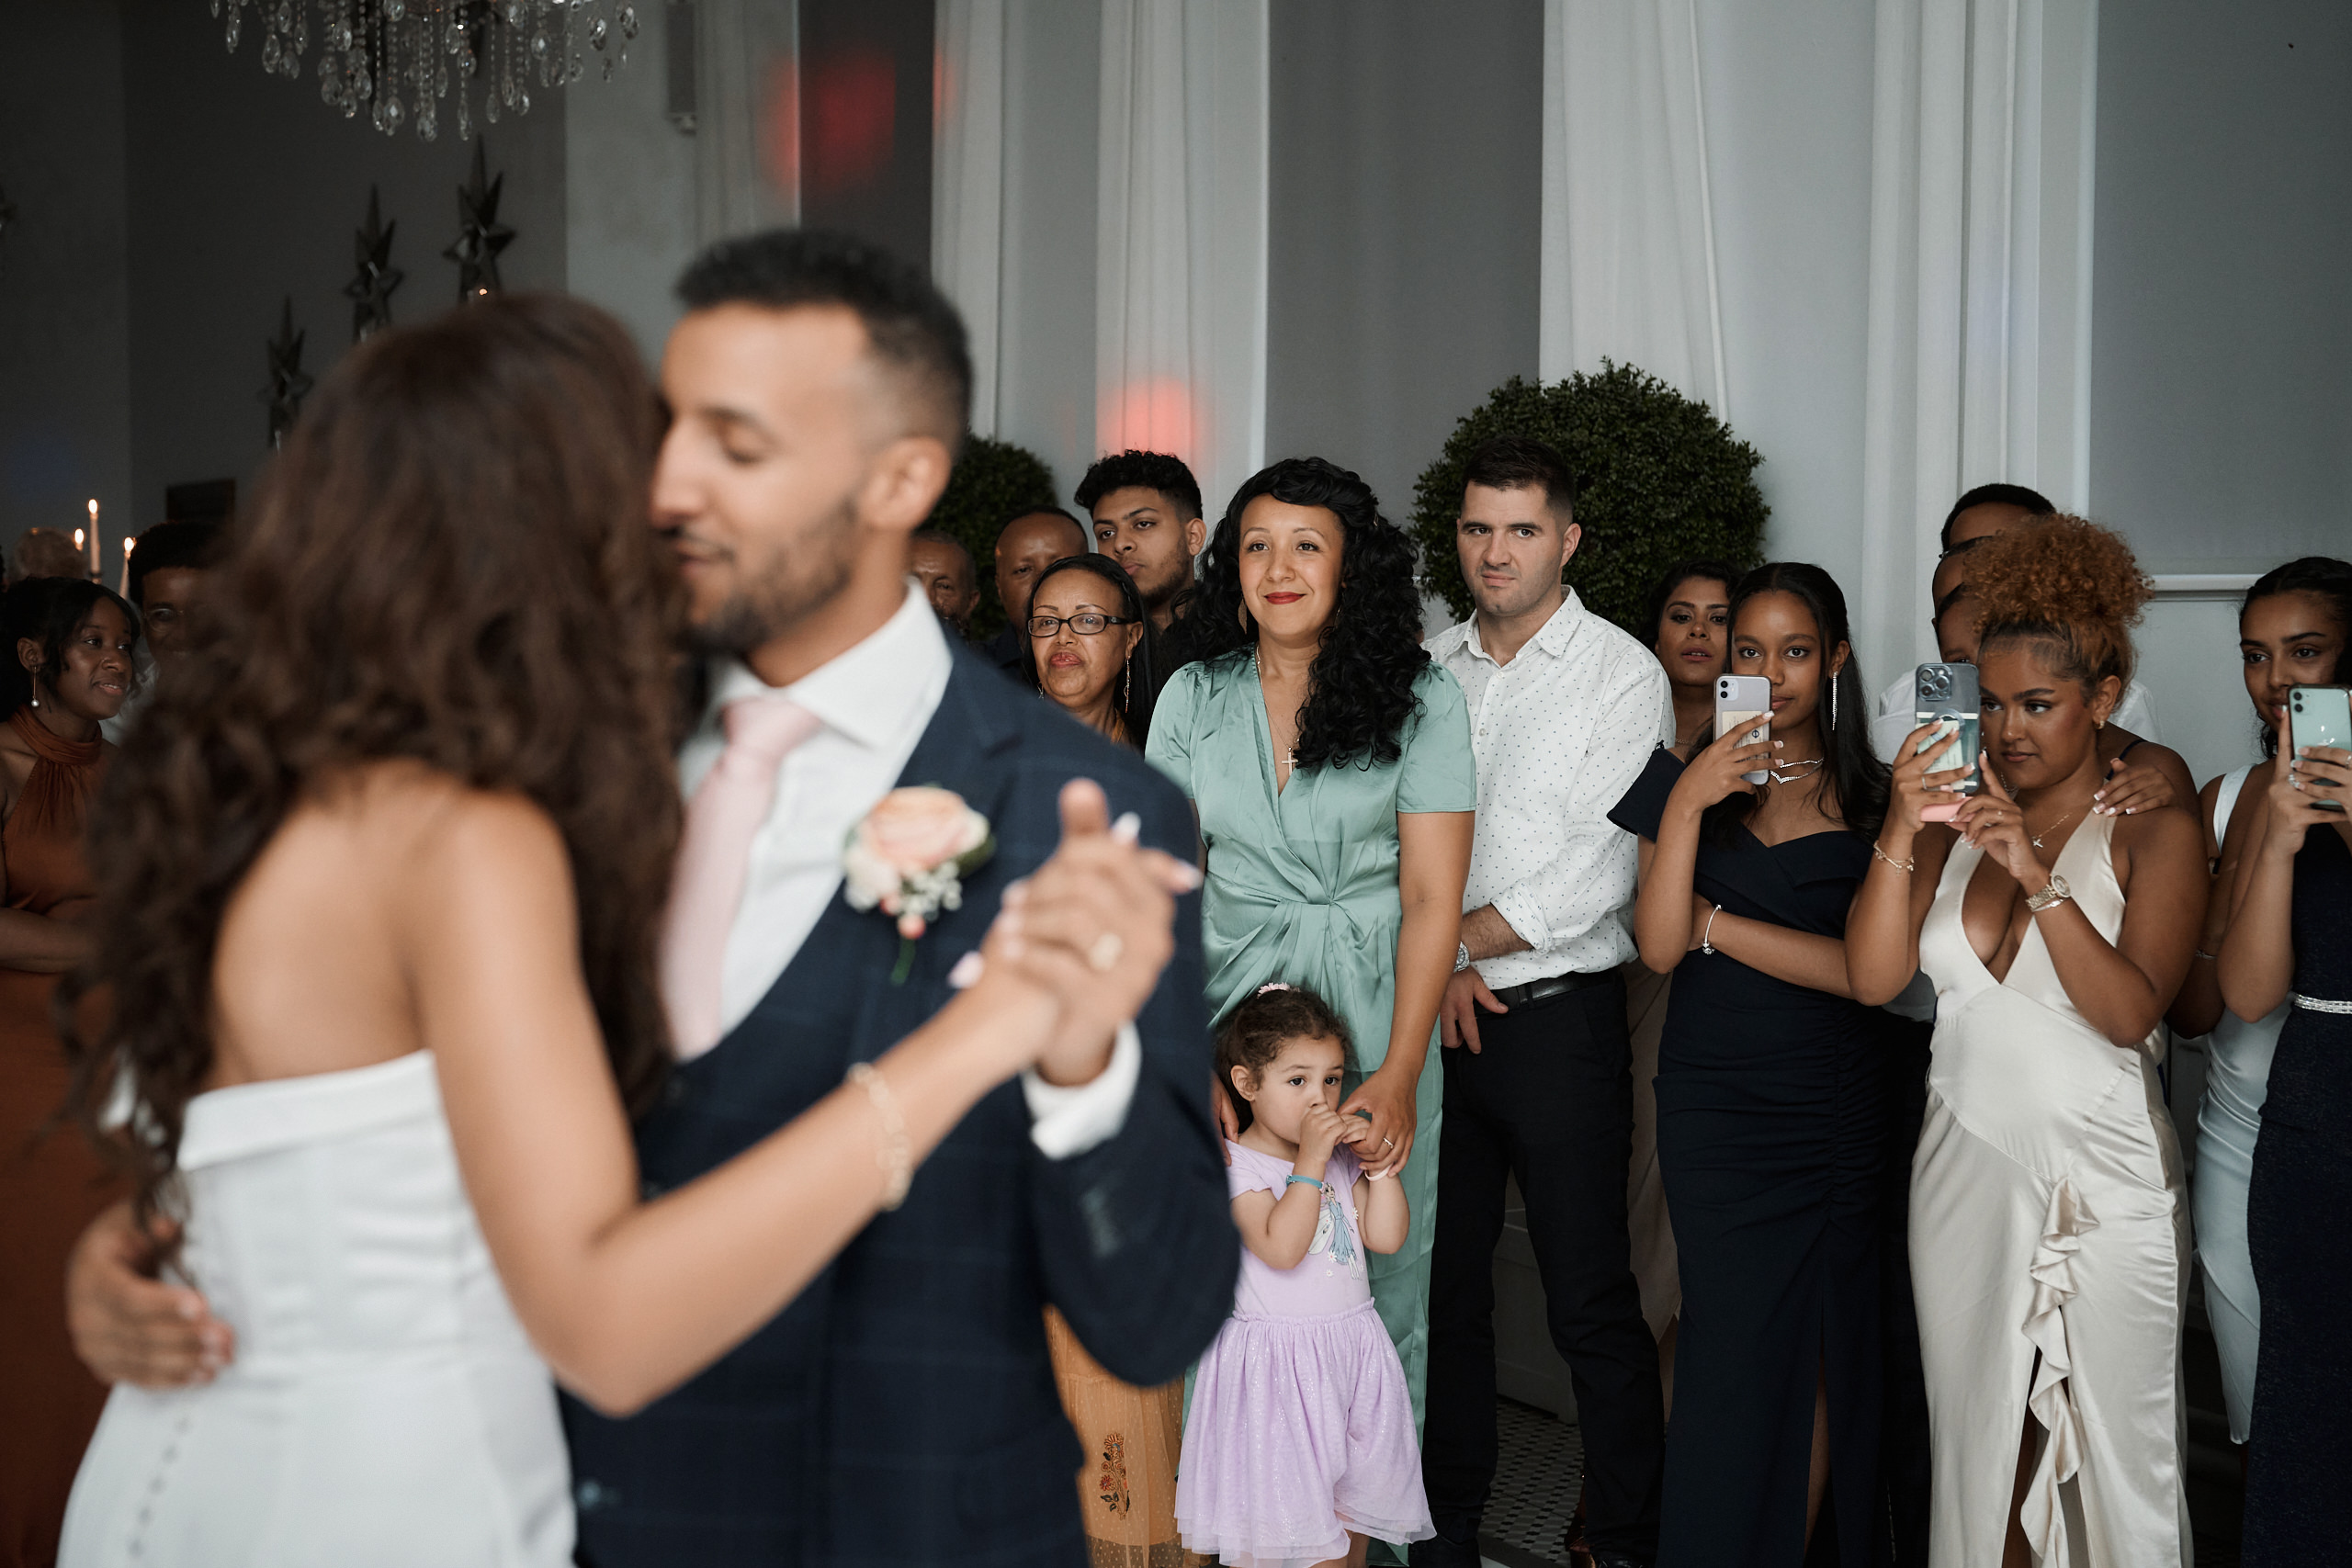 A couple having their first dance at their wedding party.